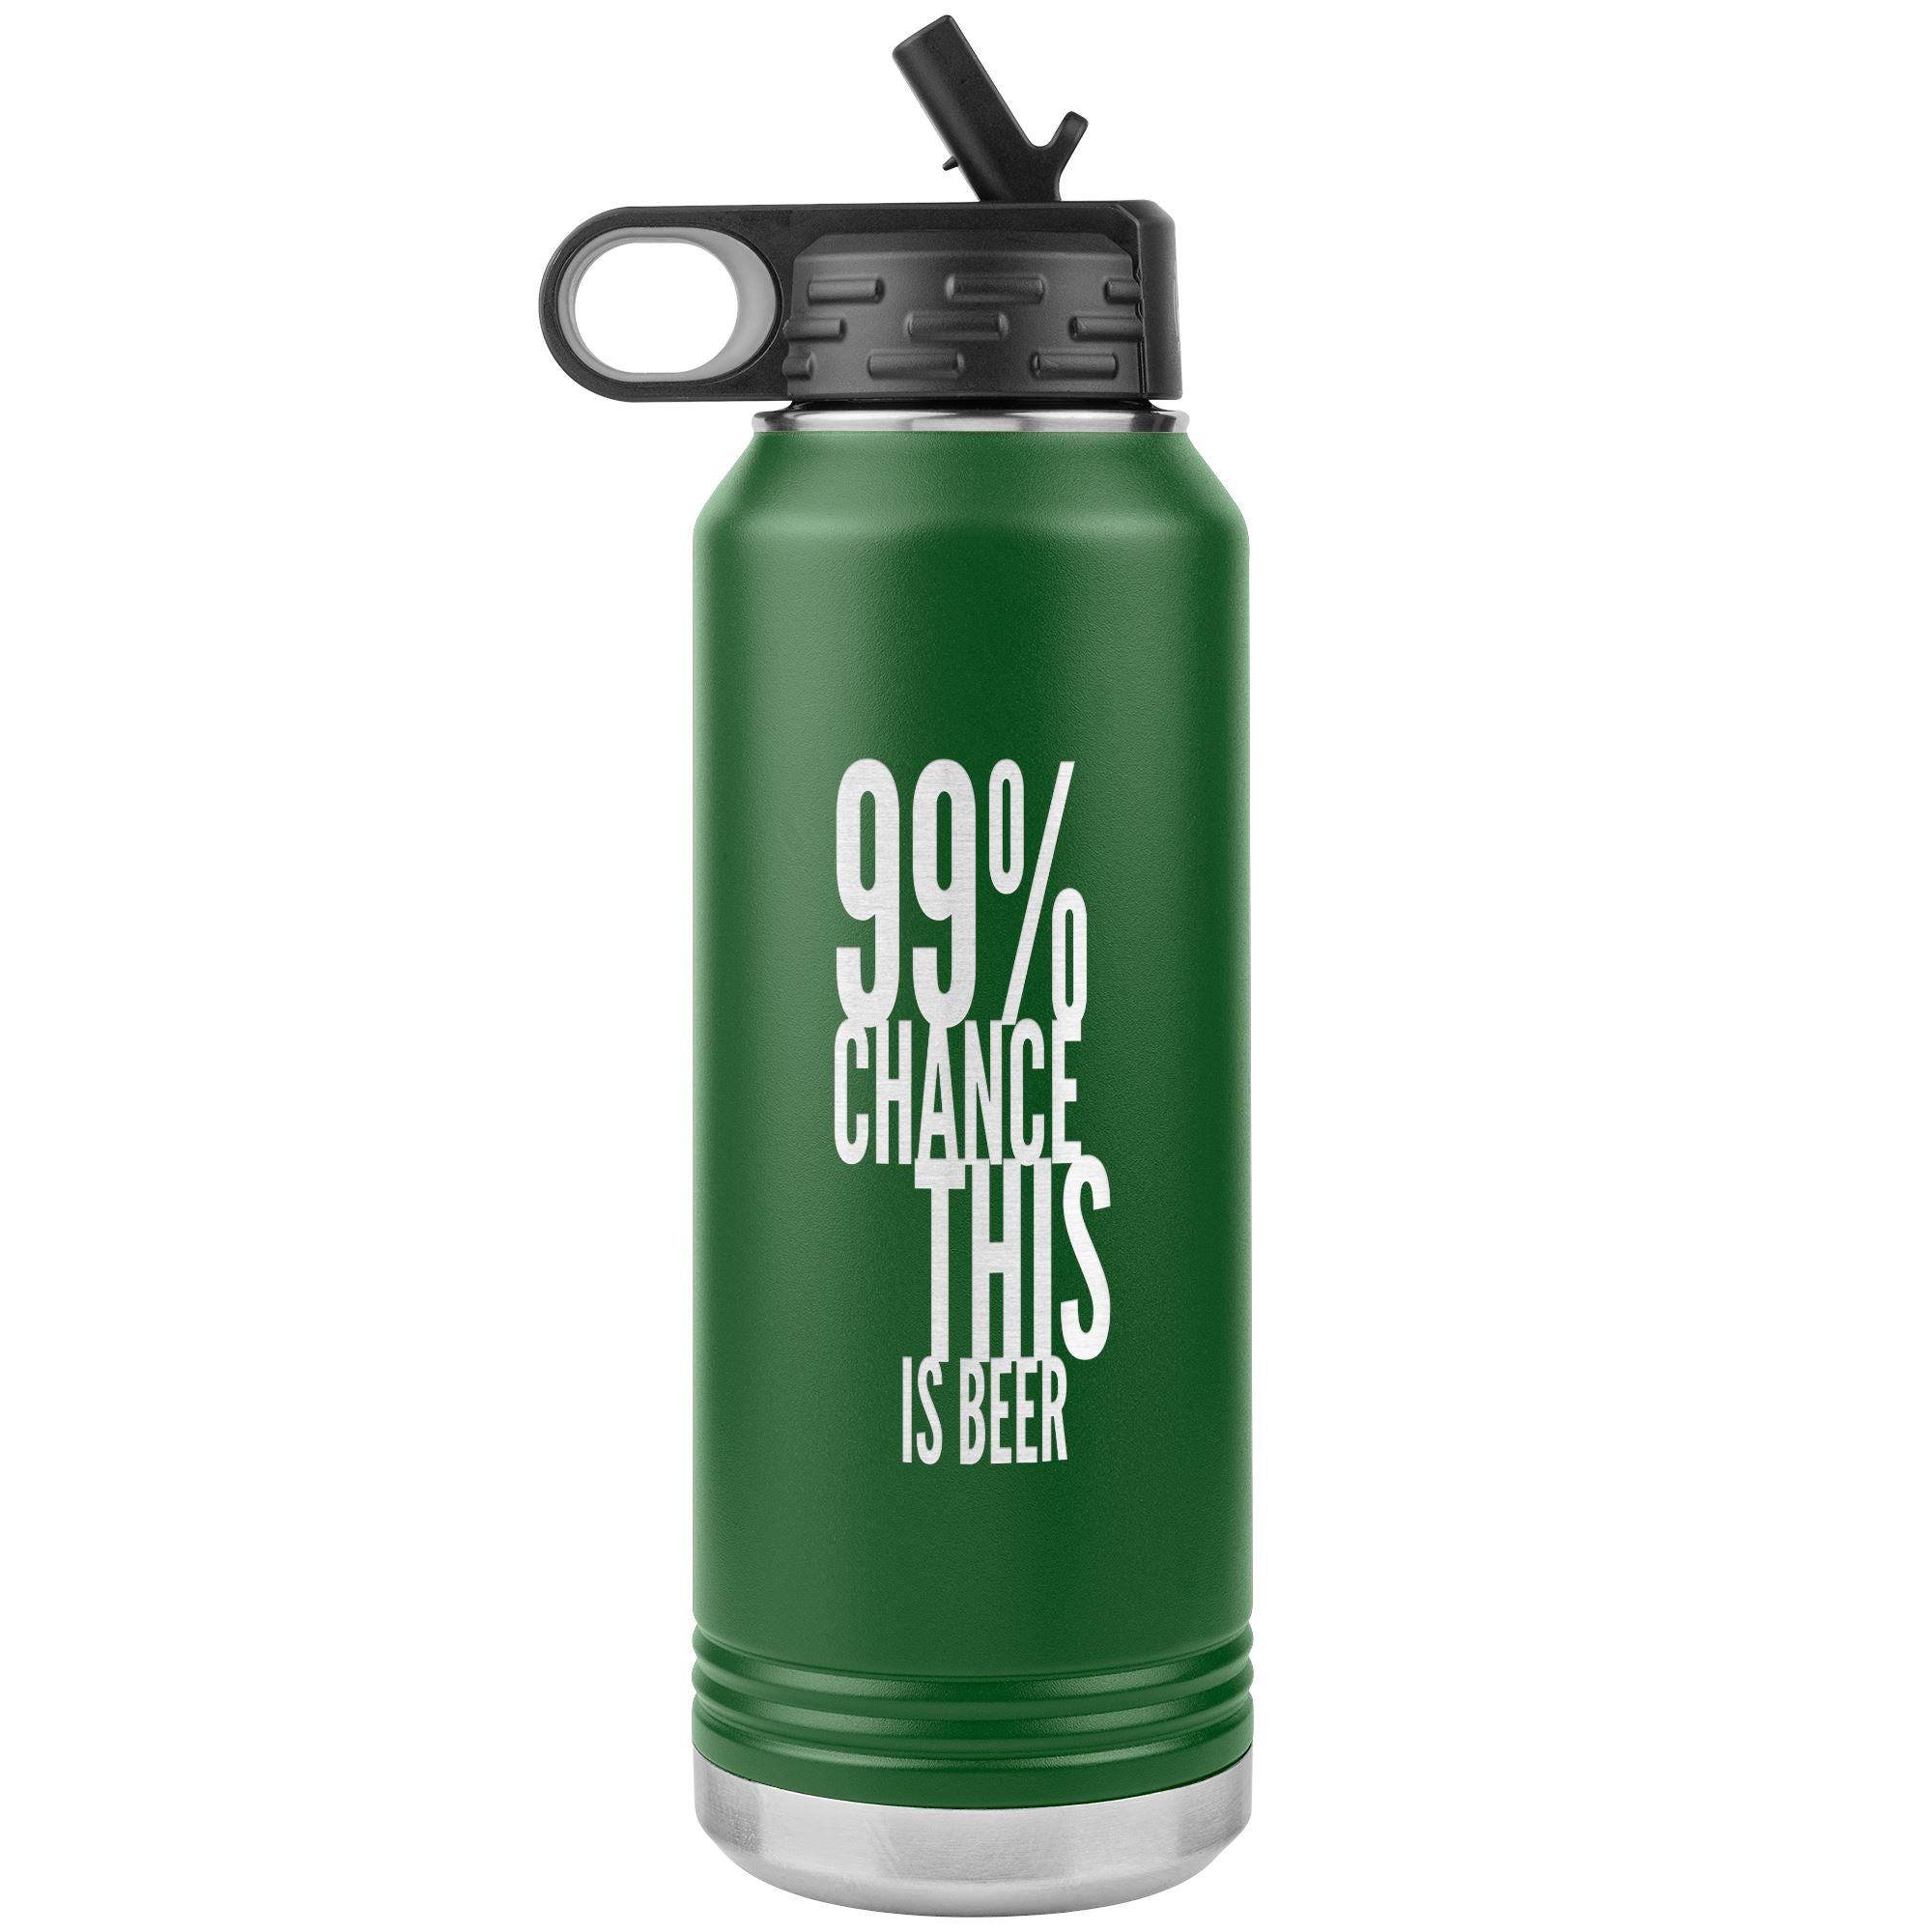 99 Percent Chance This Is Beer 32oz Tumbler Tumblers Green 